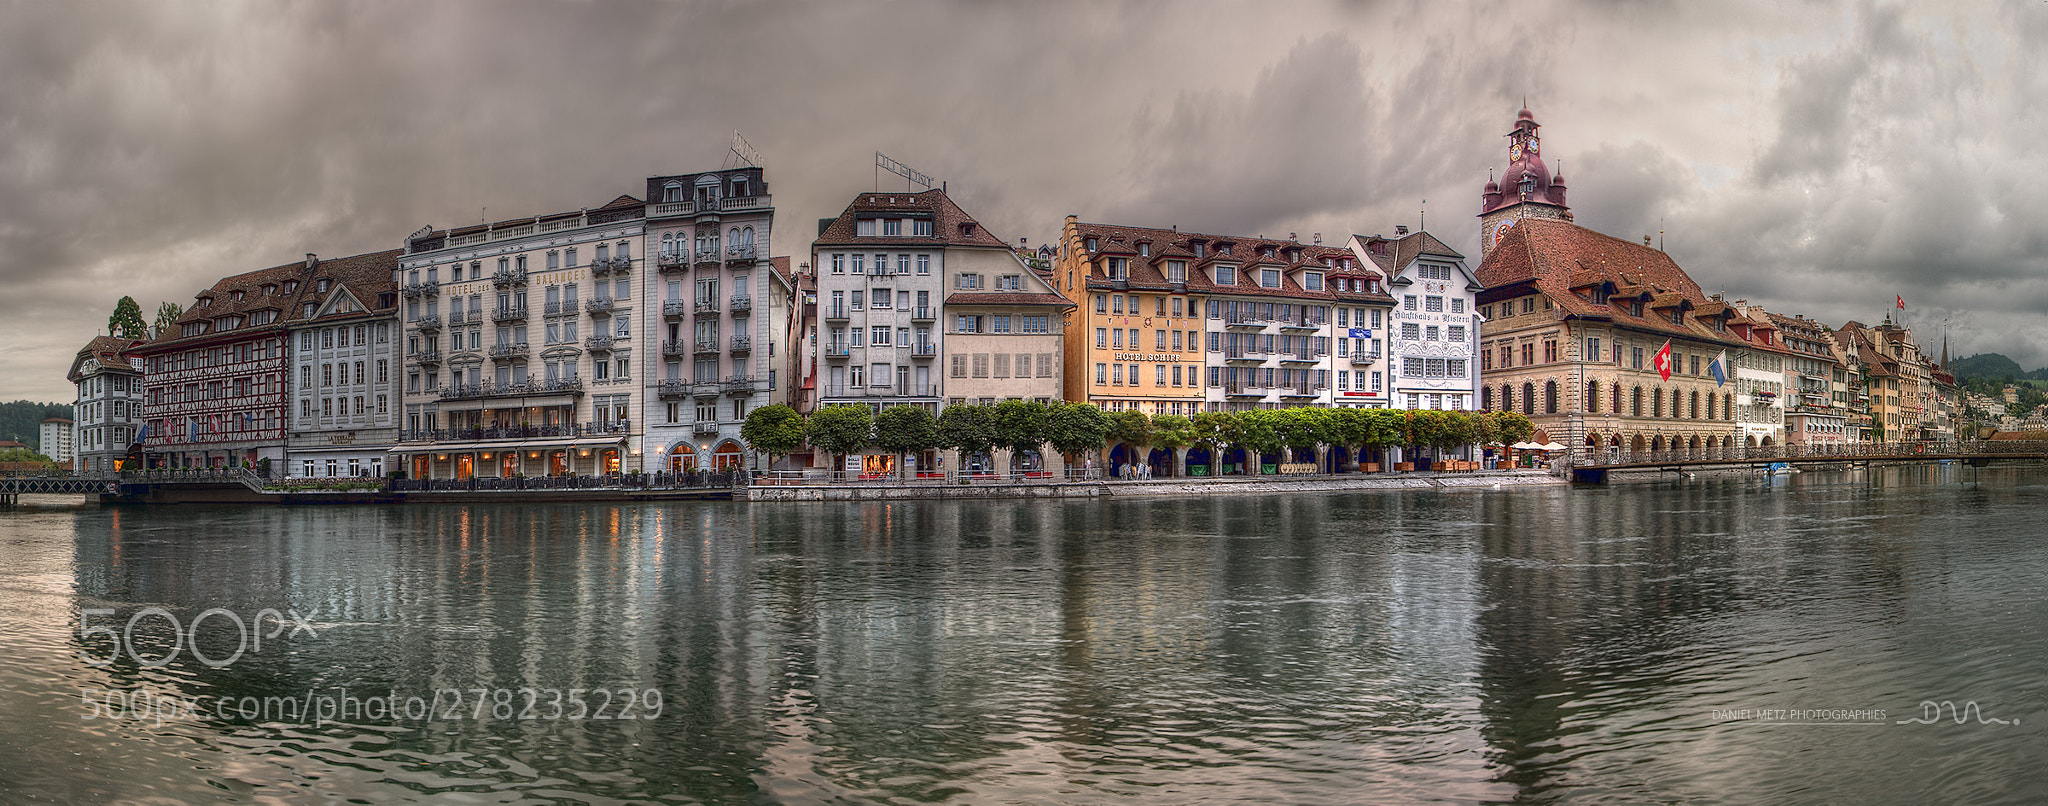 swiss – Page 3 – Shutter Stock Image Database